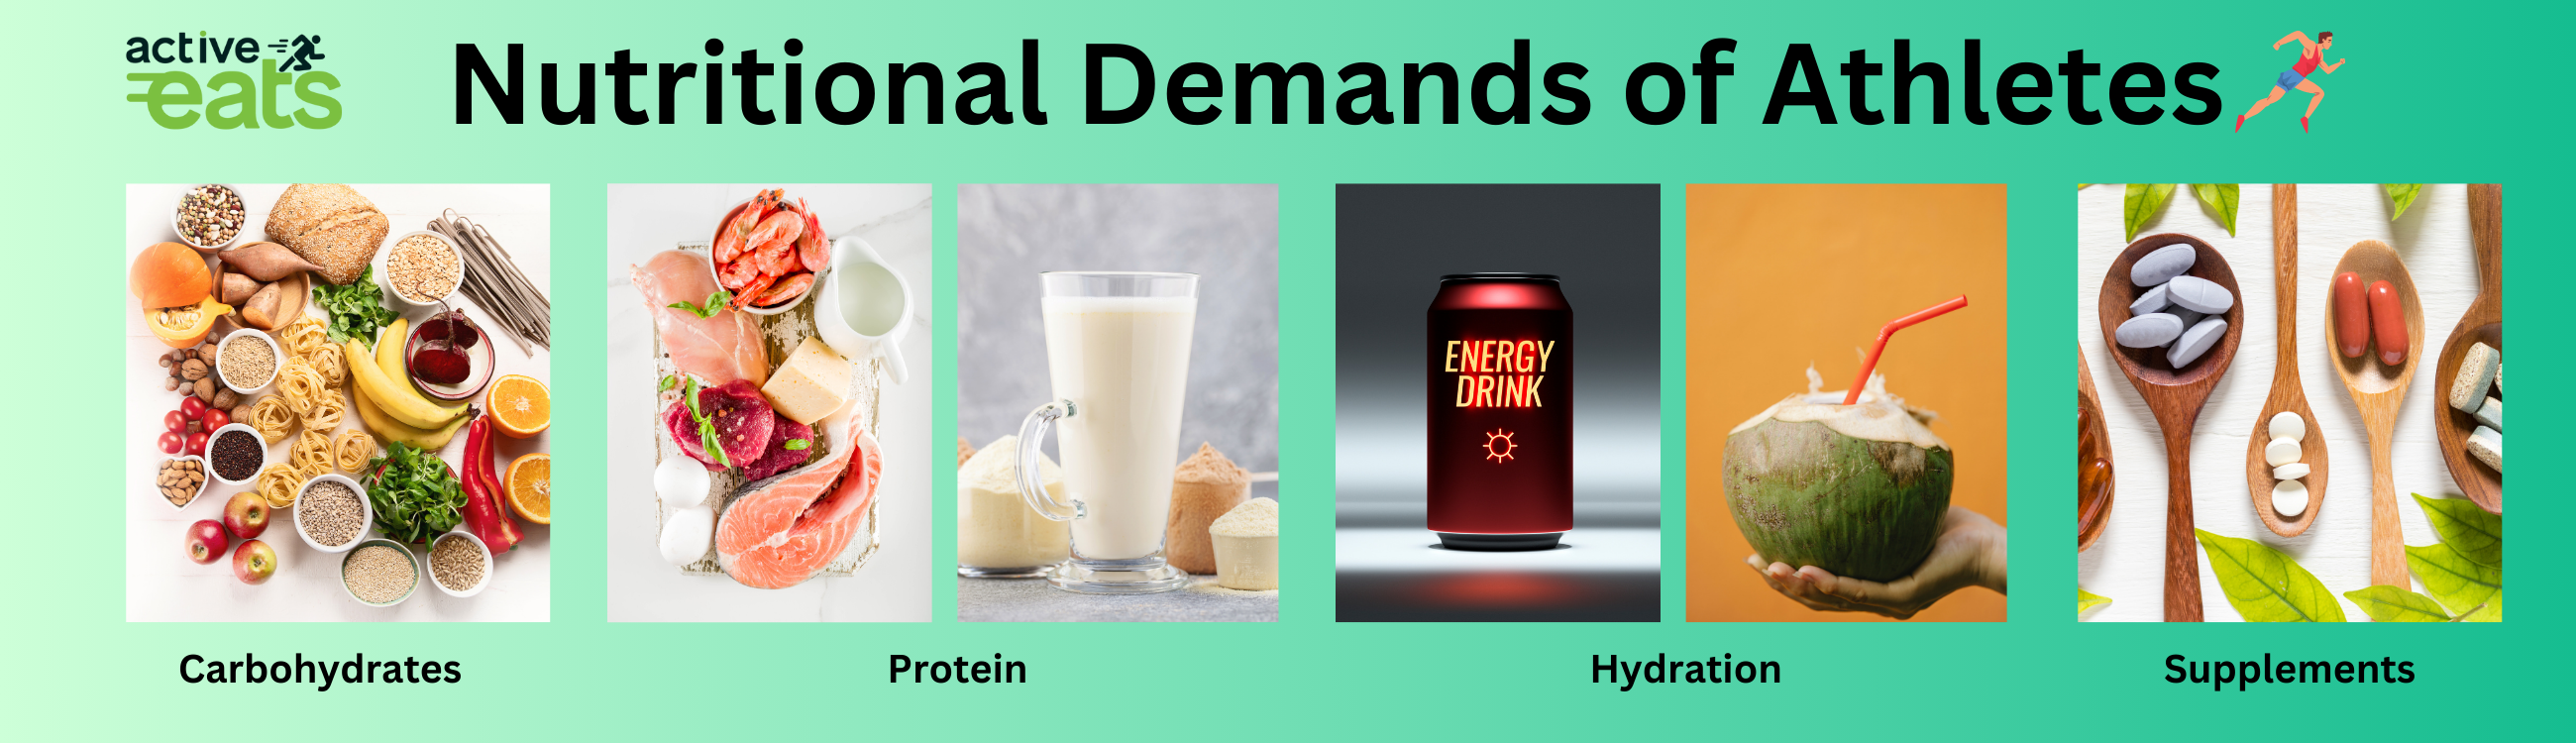 image showing nutritional demand of athletes which includes carbohydrates rich food items, protein rich food and drinks, hydration sources like energy drink and coconut water and supplements